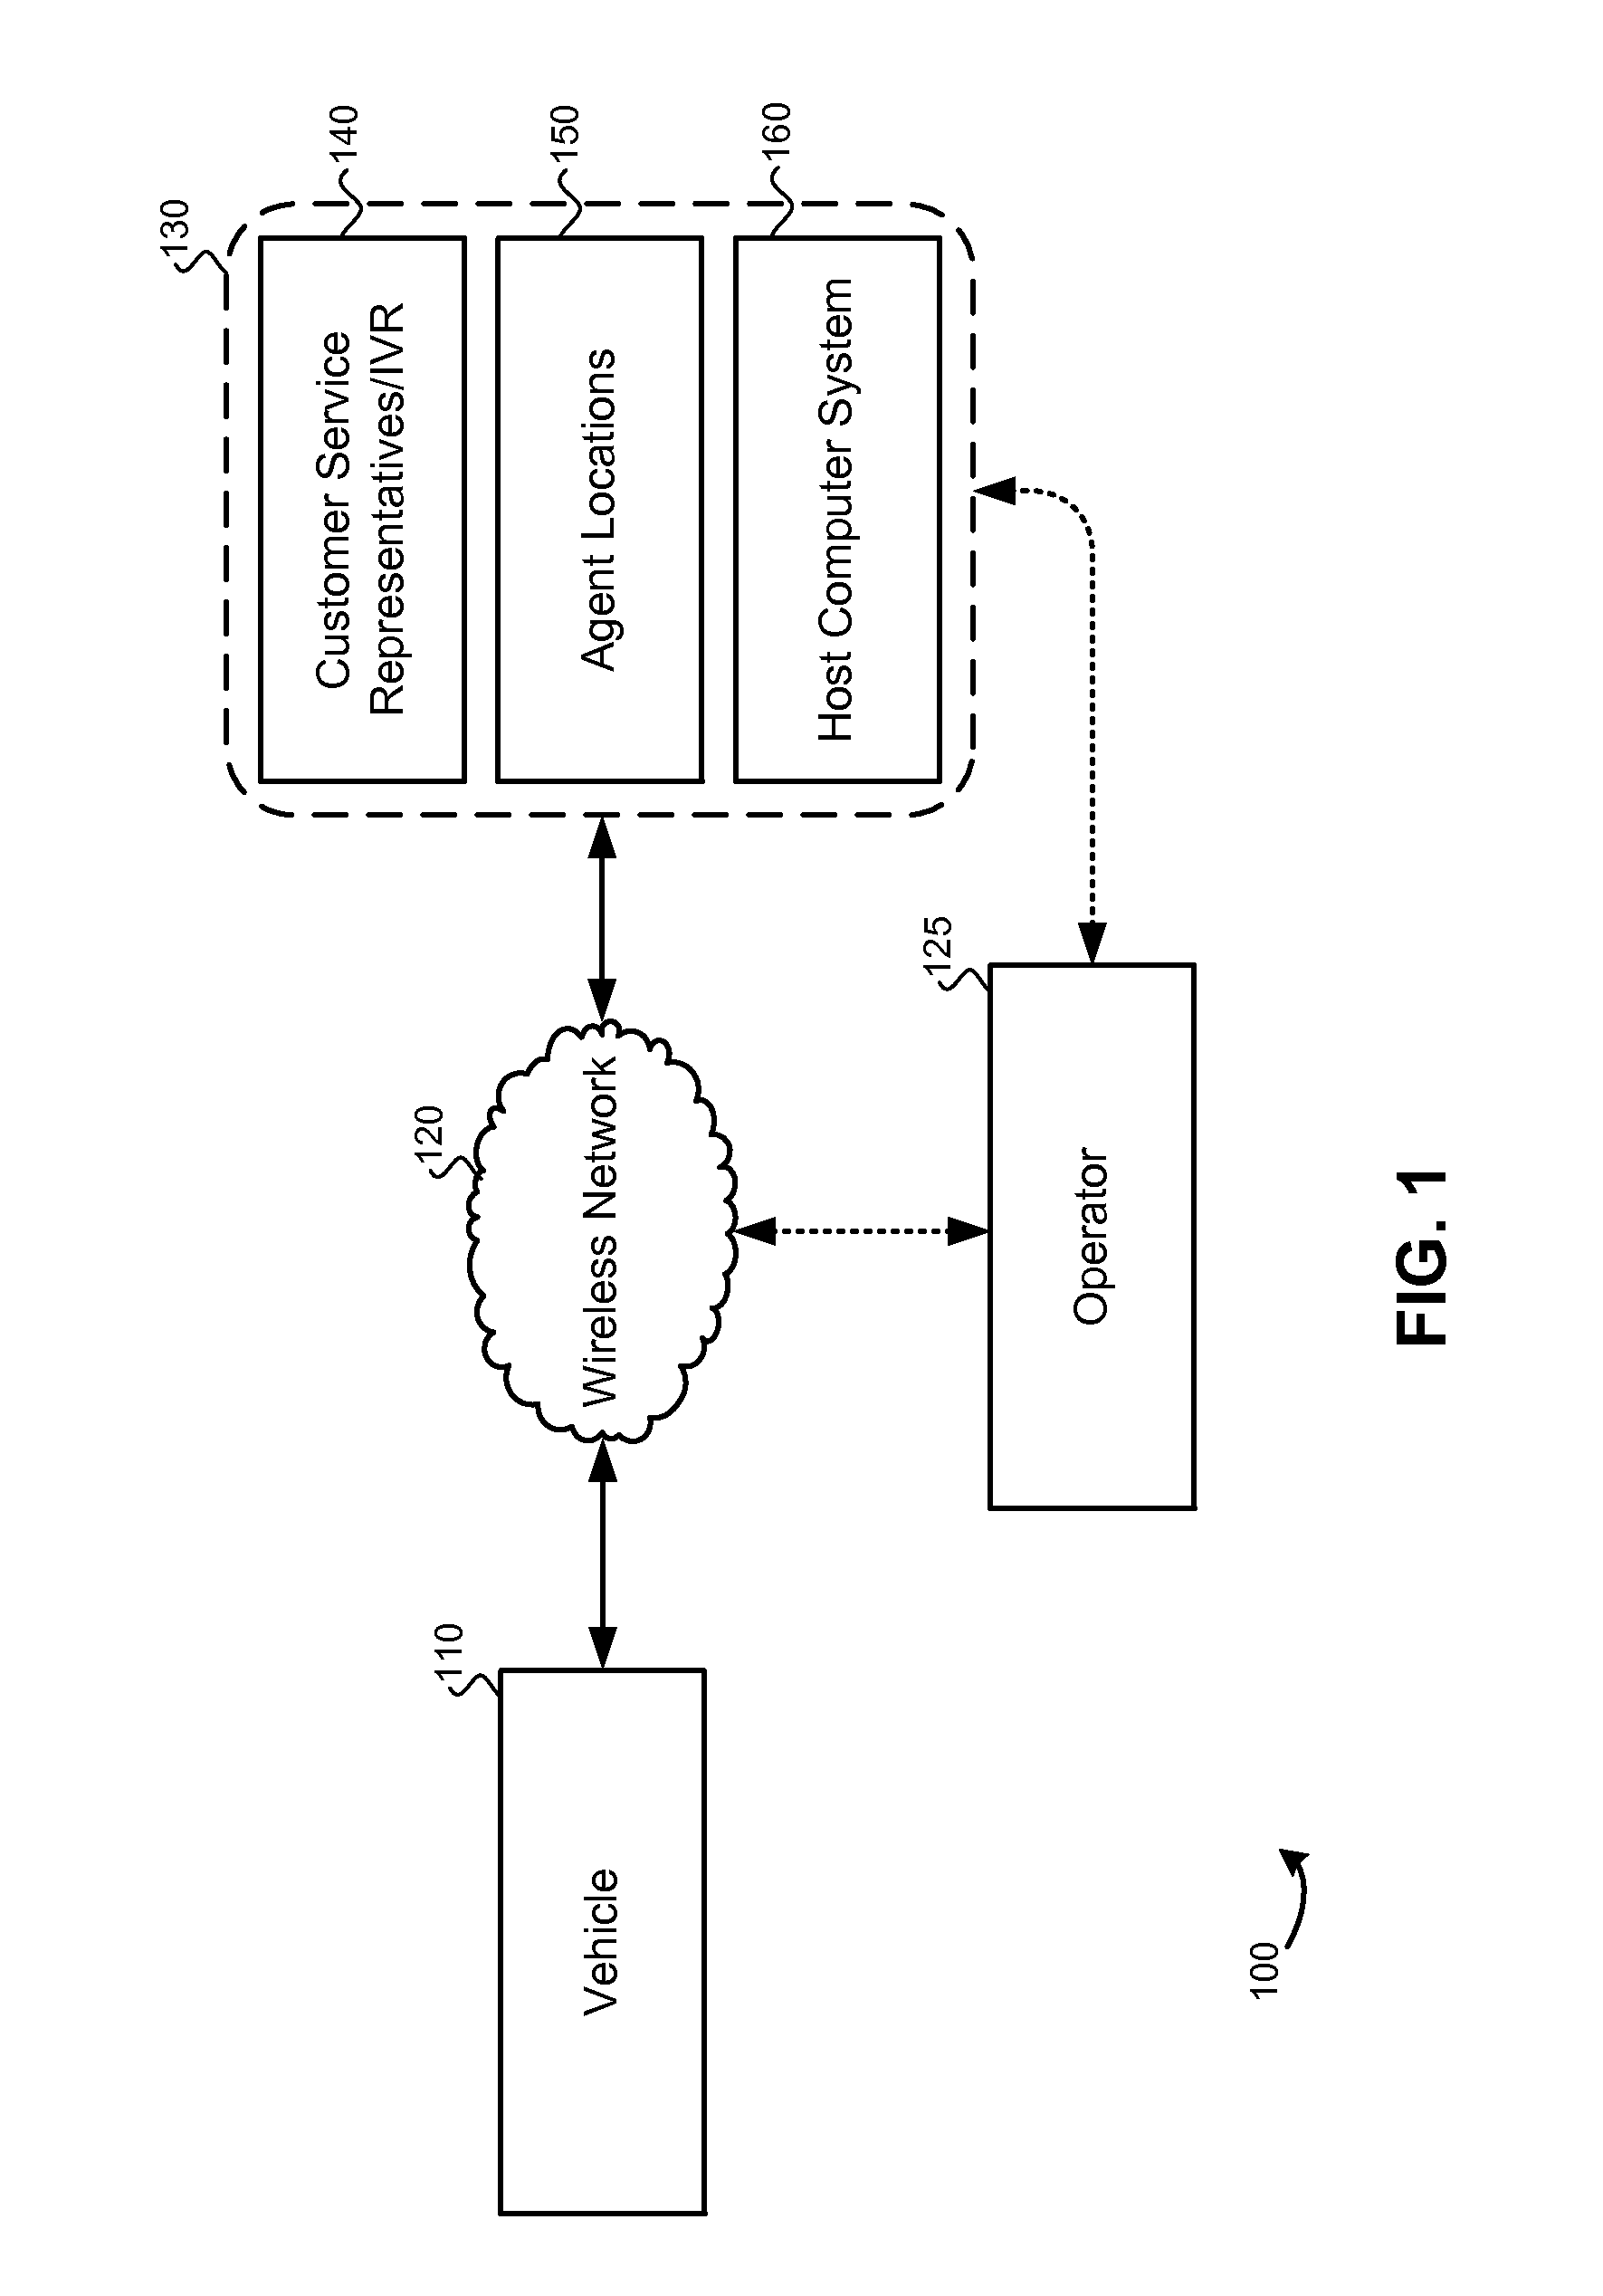 Vehicular-based transactions, systems and methods